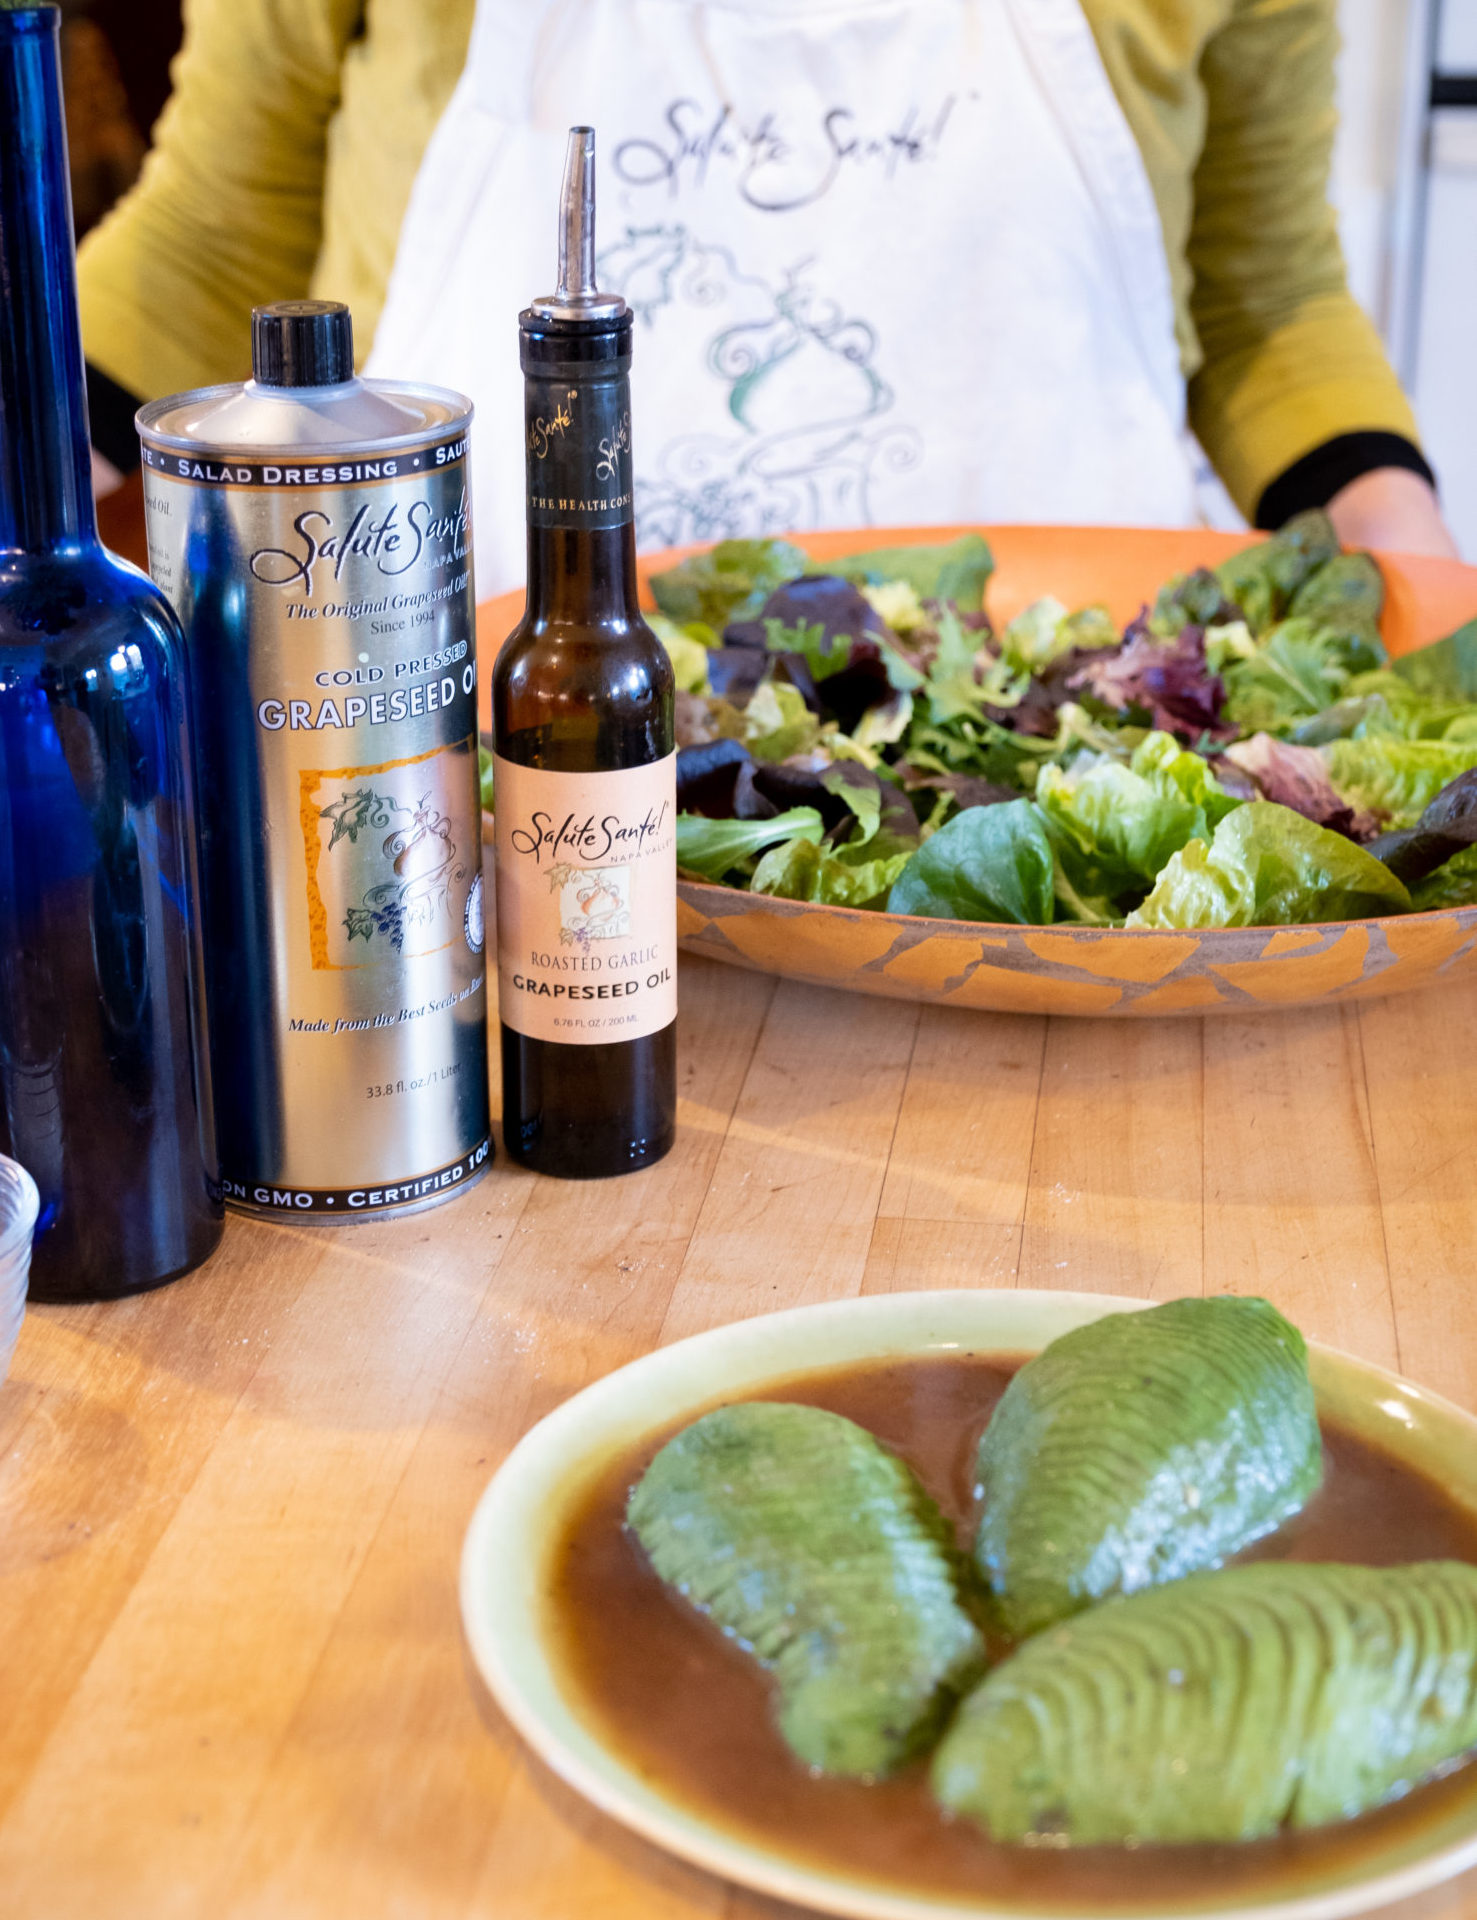 Wildfire Salad Dressing (Build Your Own Gift)